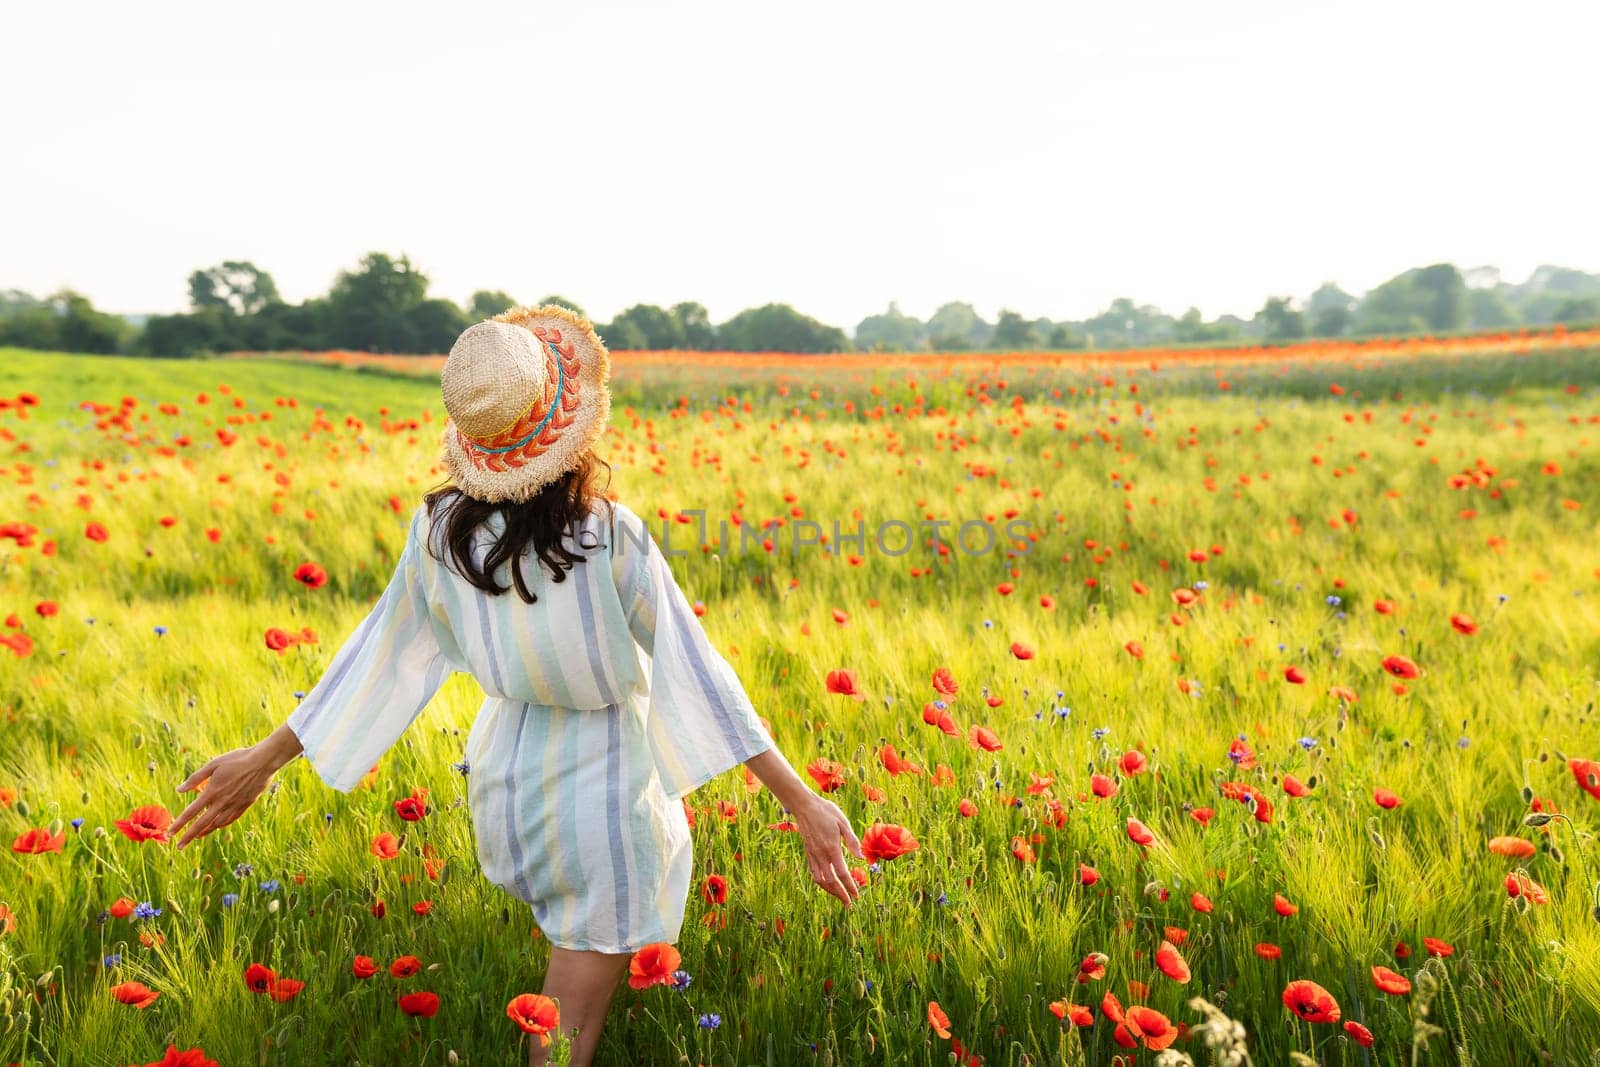 Sunrise in a beautiful wheat and poppy field. A happy girl in a straw hat and a white striped dress stands in the middle of a field, the sun shines in her face, joy, happiness. by sfinks